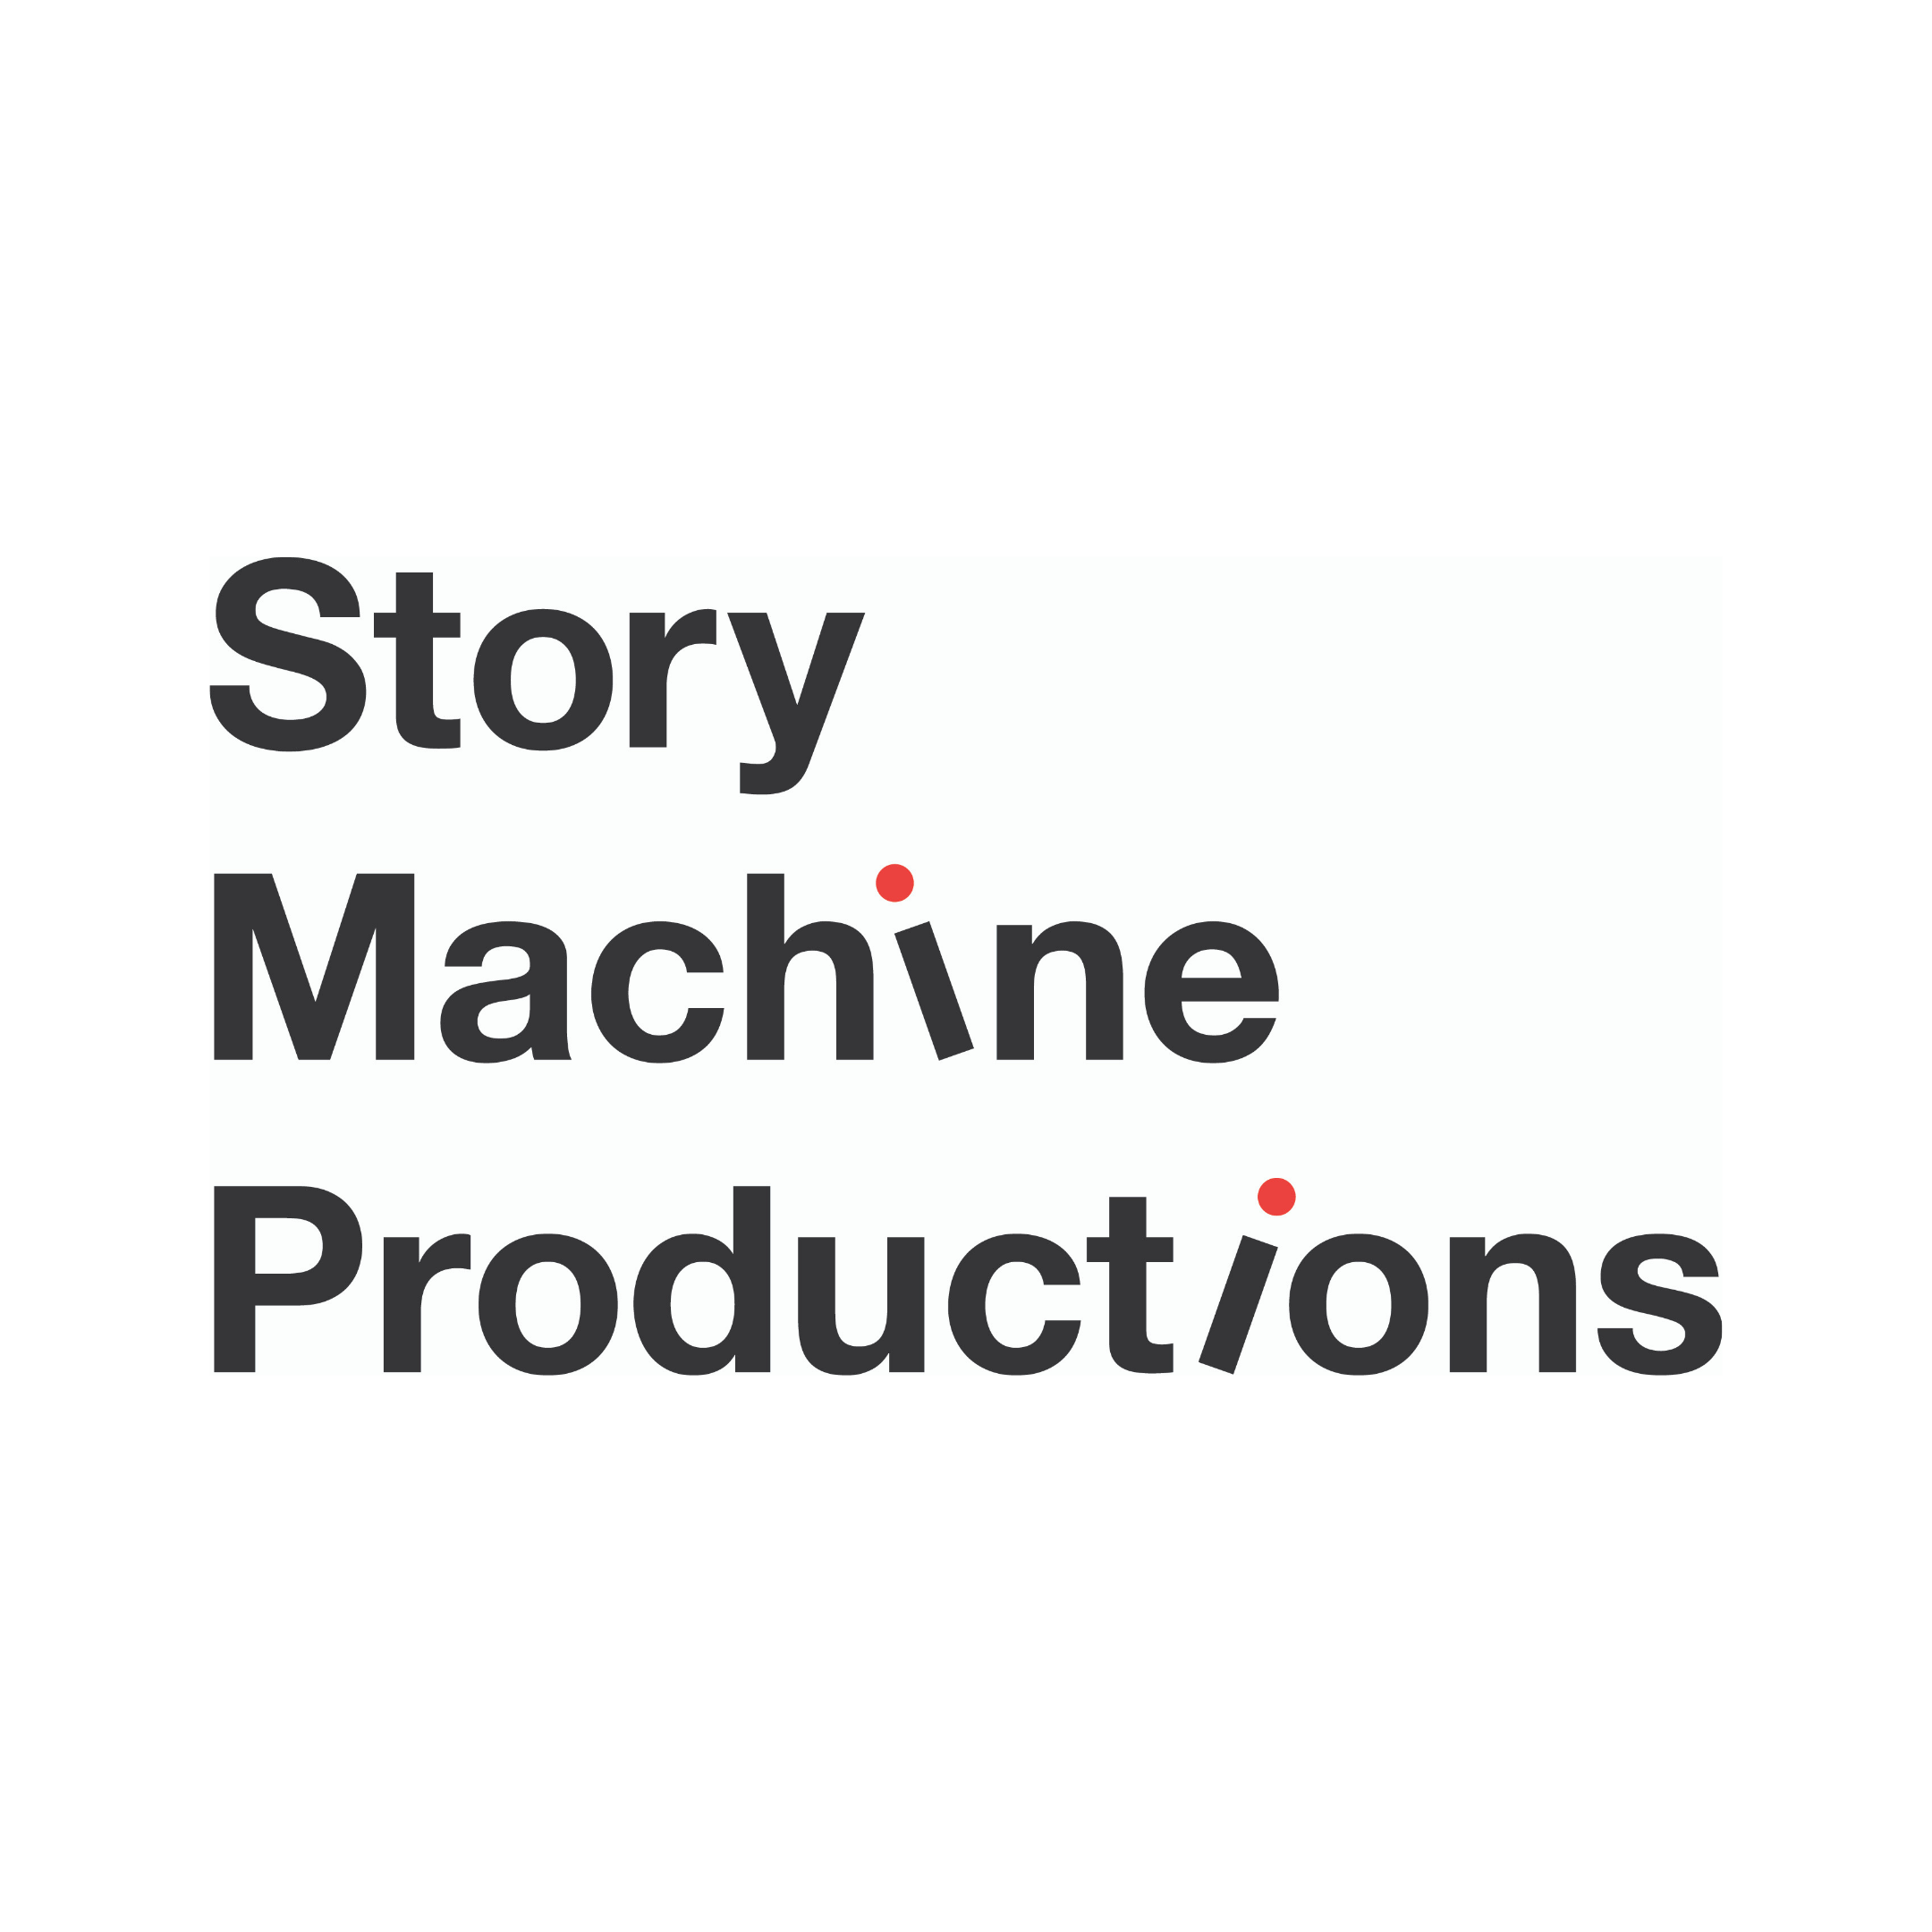 Story Machine Productions